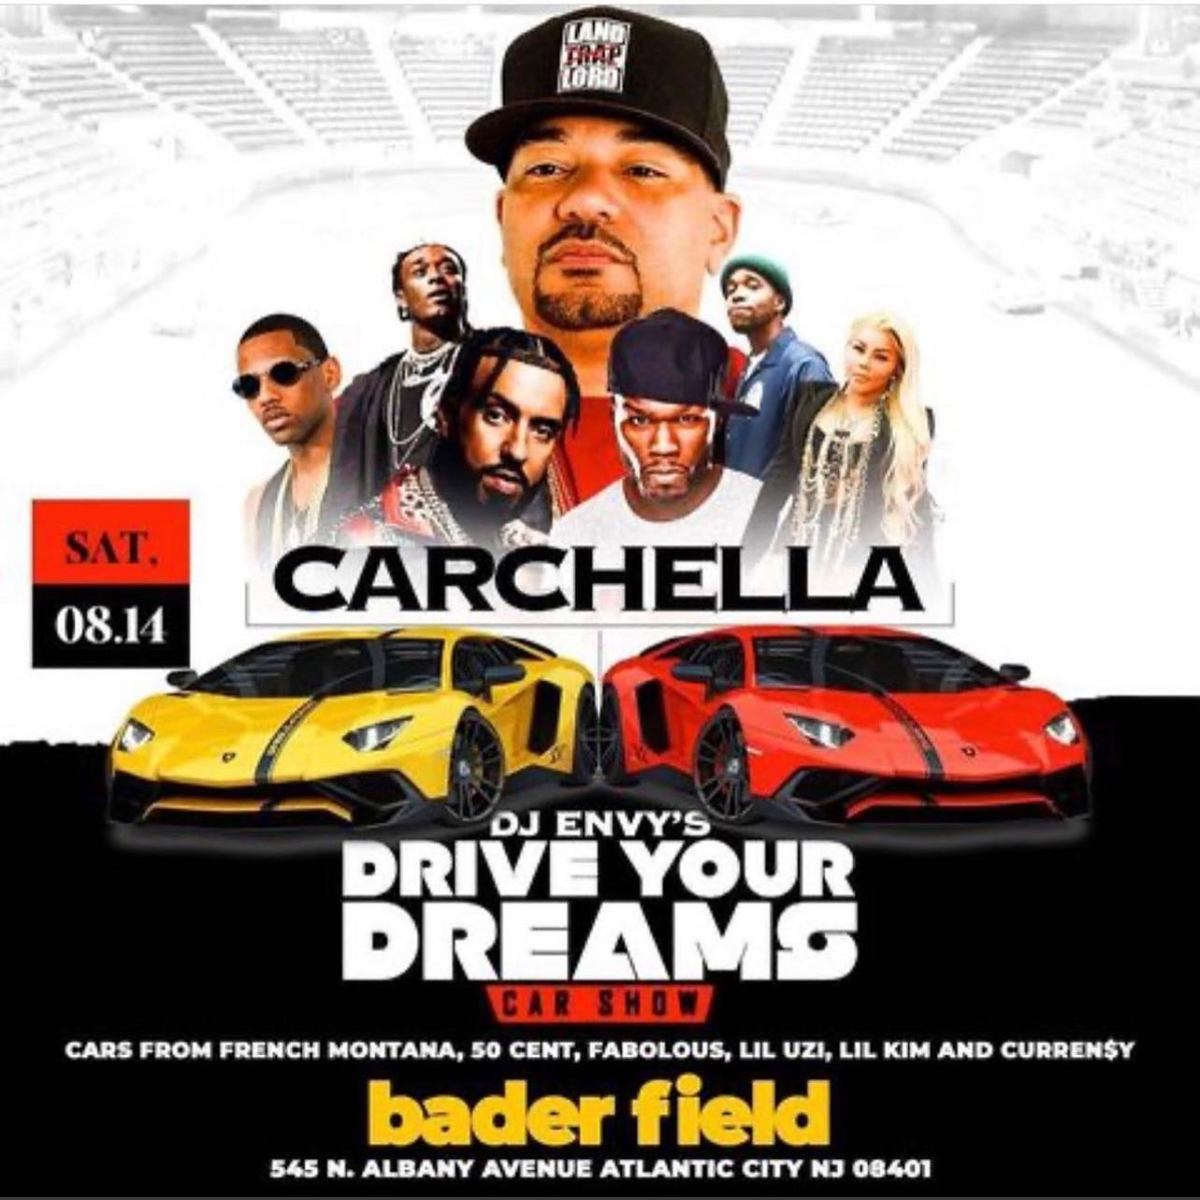 Flyer promoting "Carchella," an exotic automobile show facing a lawsuit from Coachella Valley Music and Arts Festival.